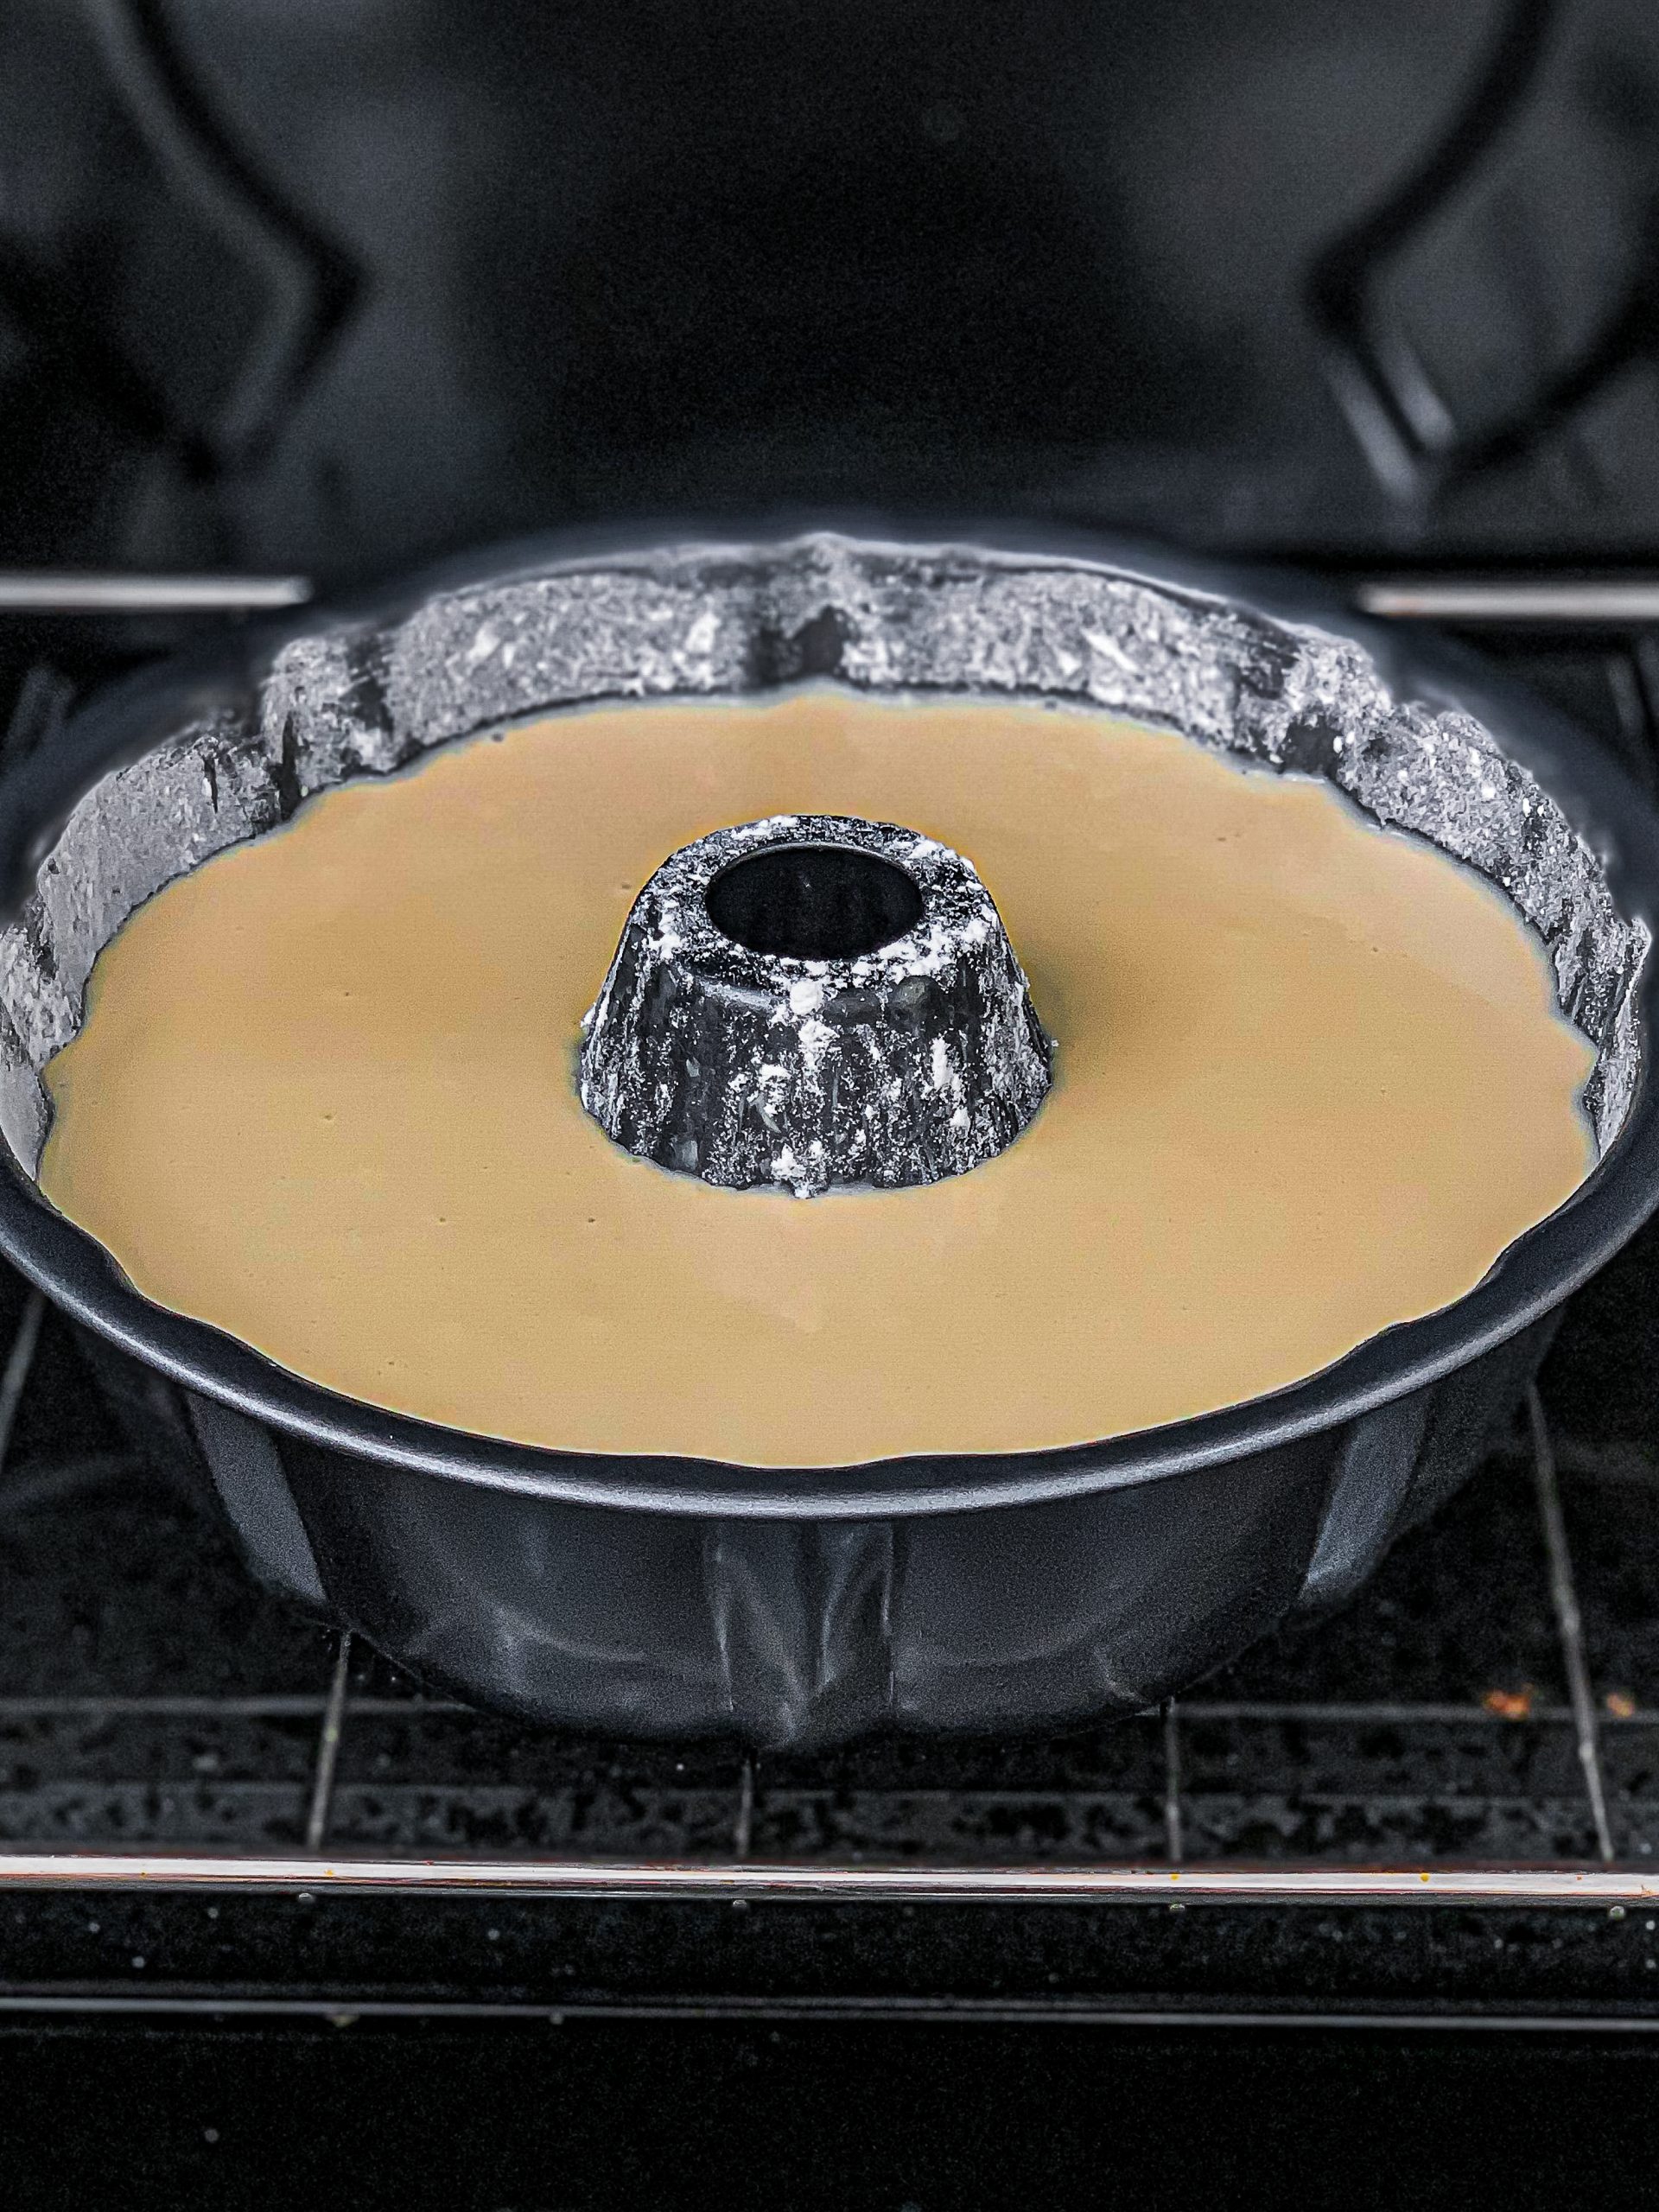 Add the blended mixture in a greased and floured Bundt pan.